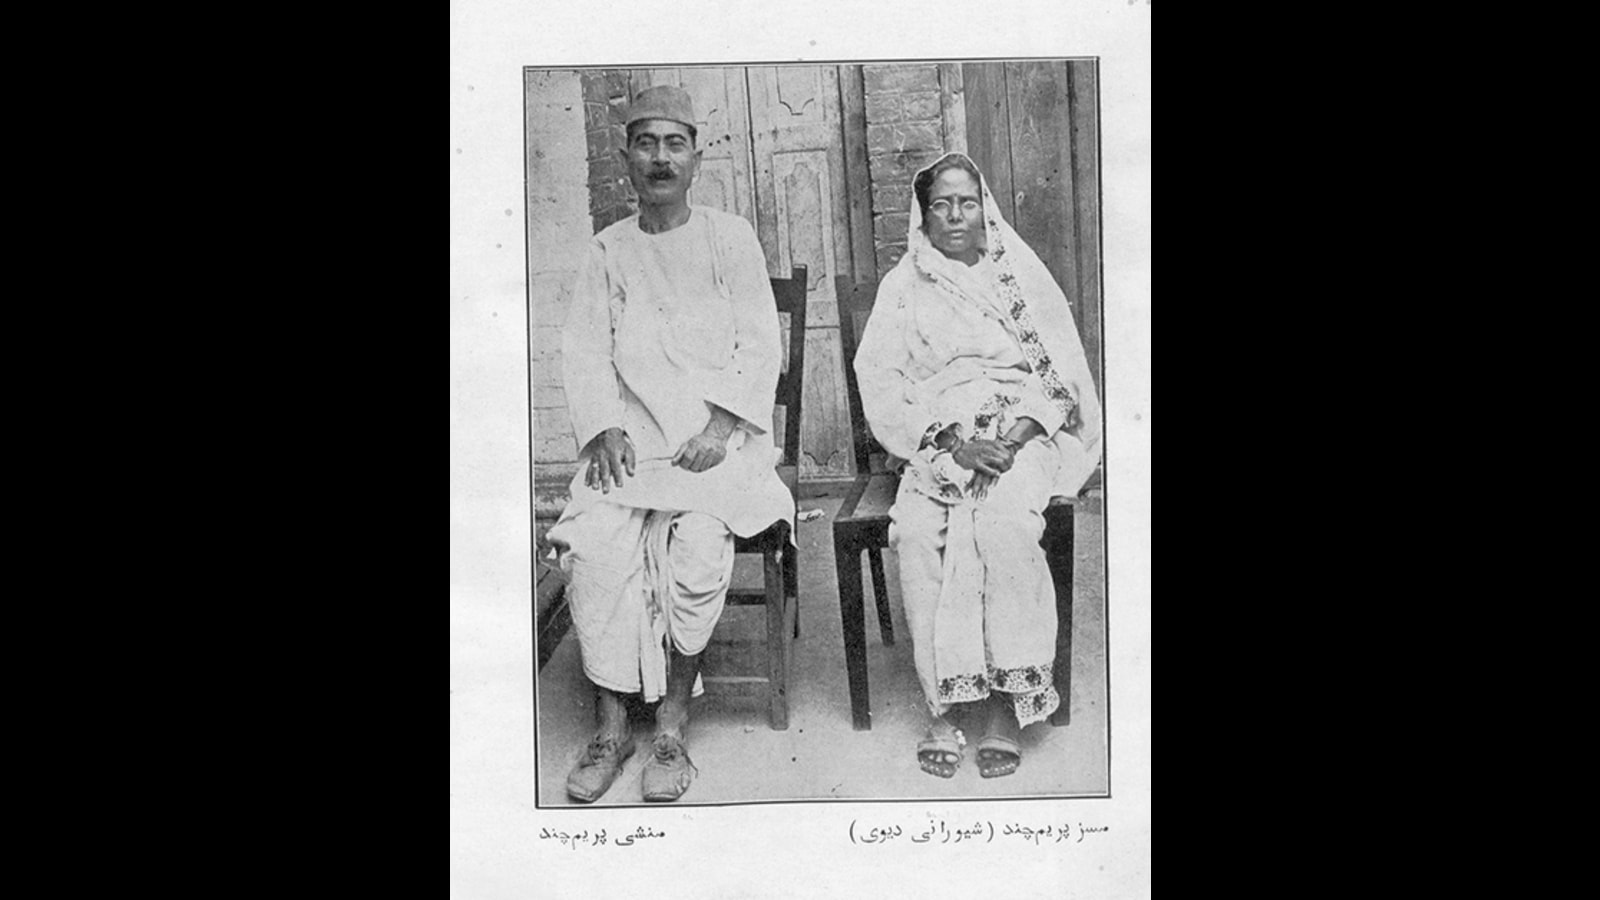 When writing wears down the sole: A tale of Premchand's torn shoes ...